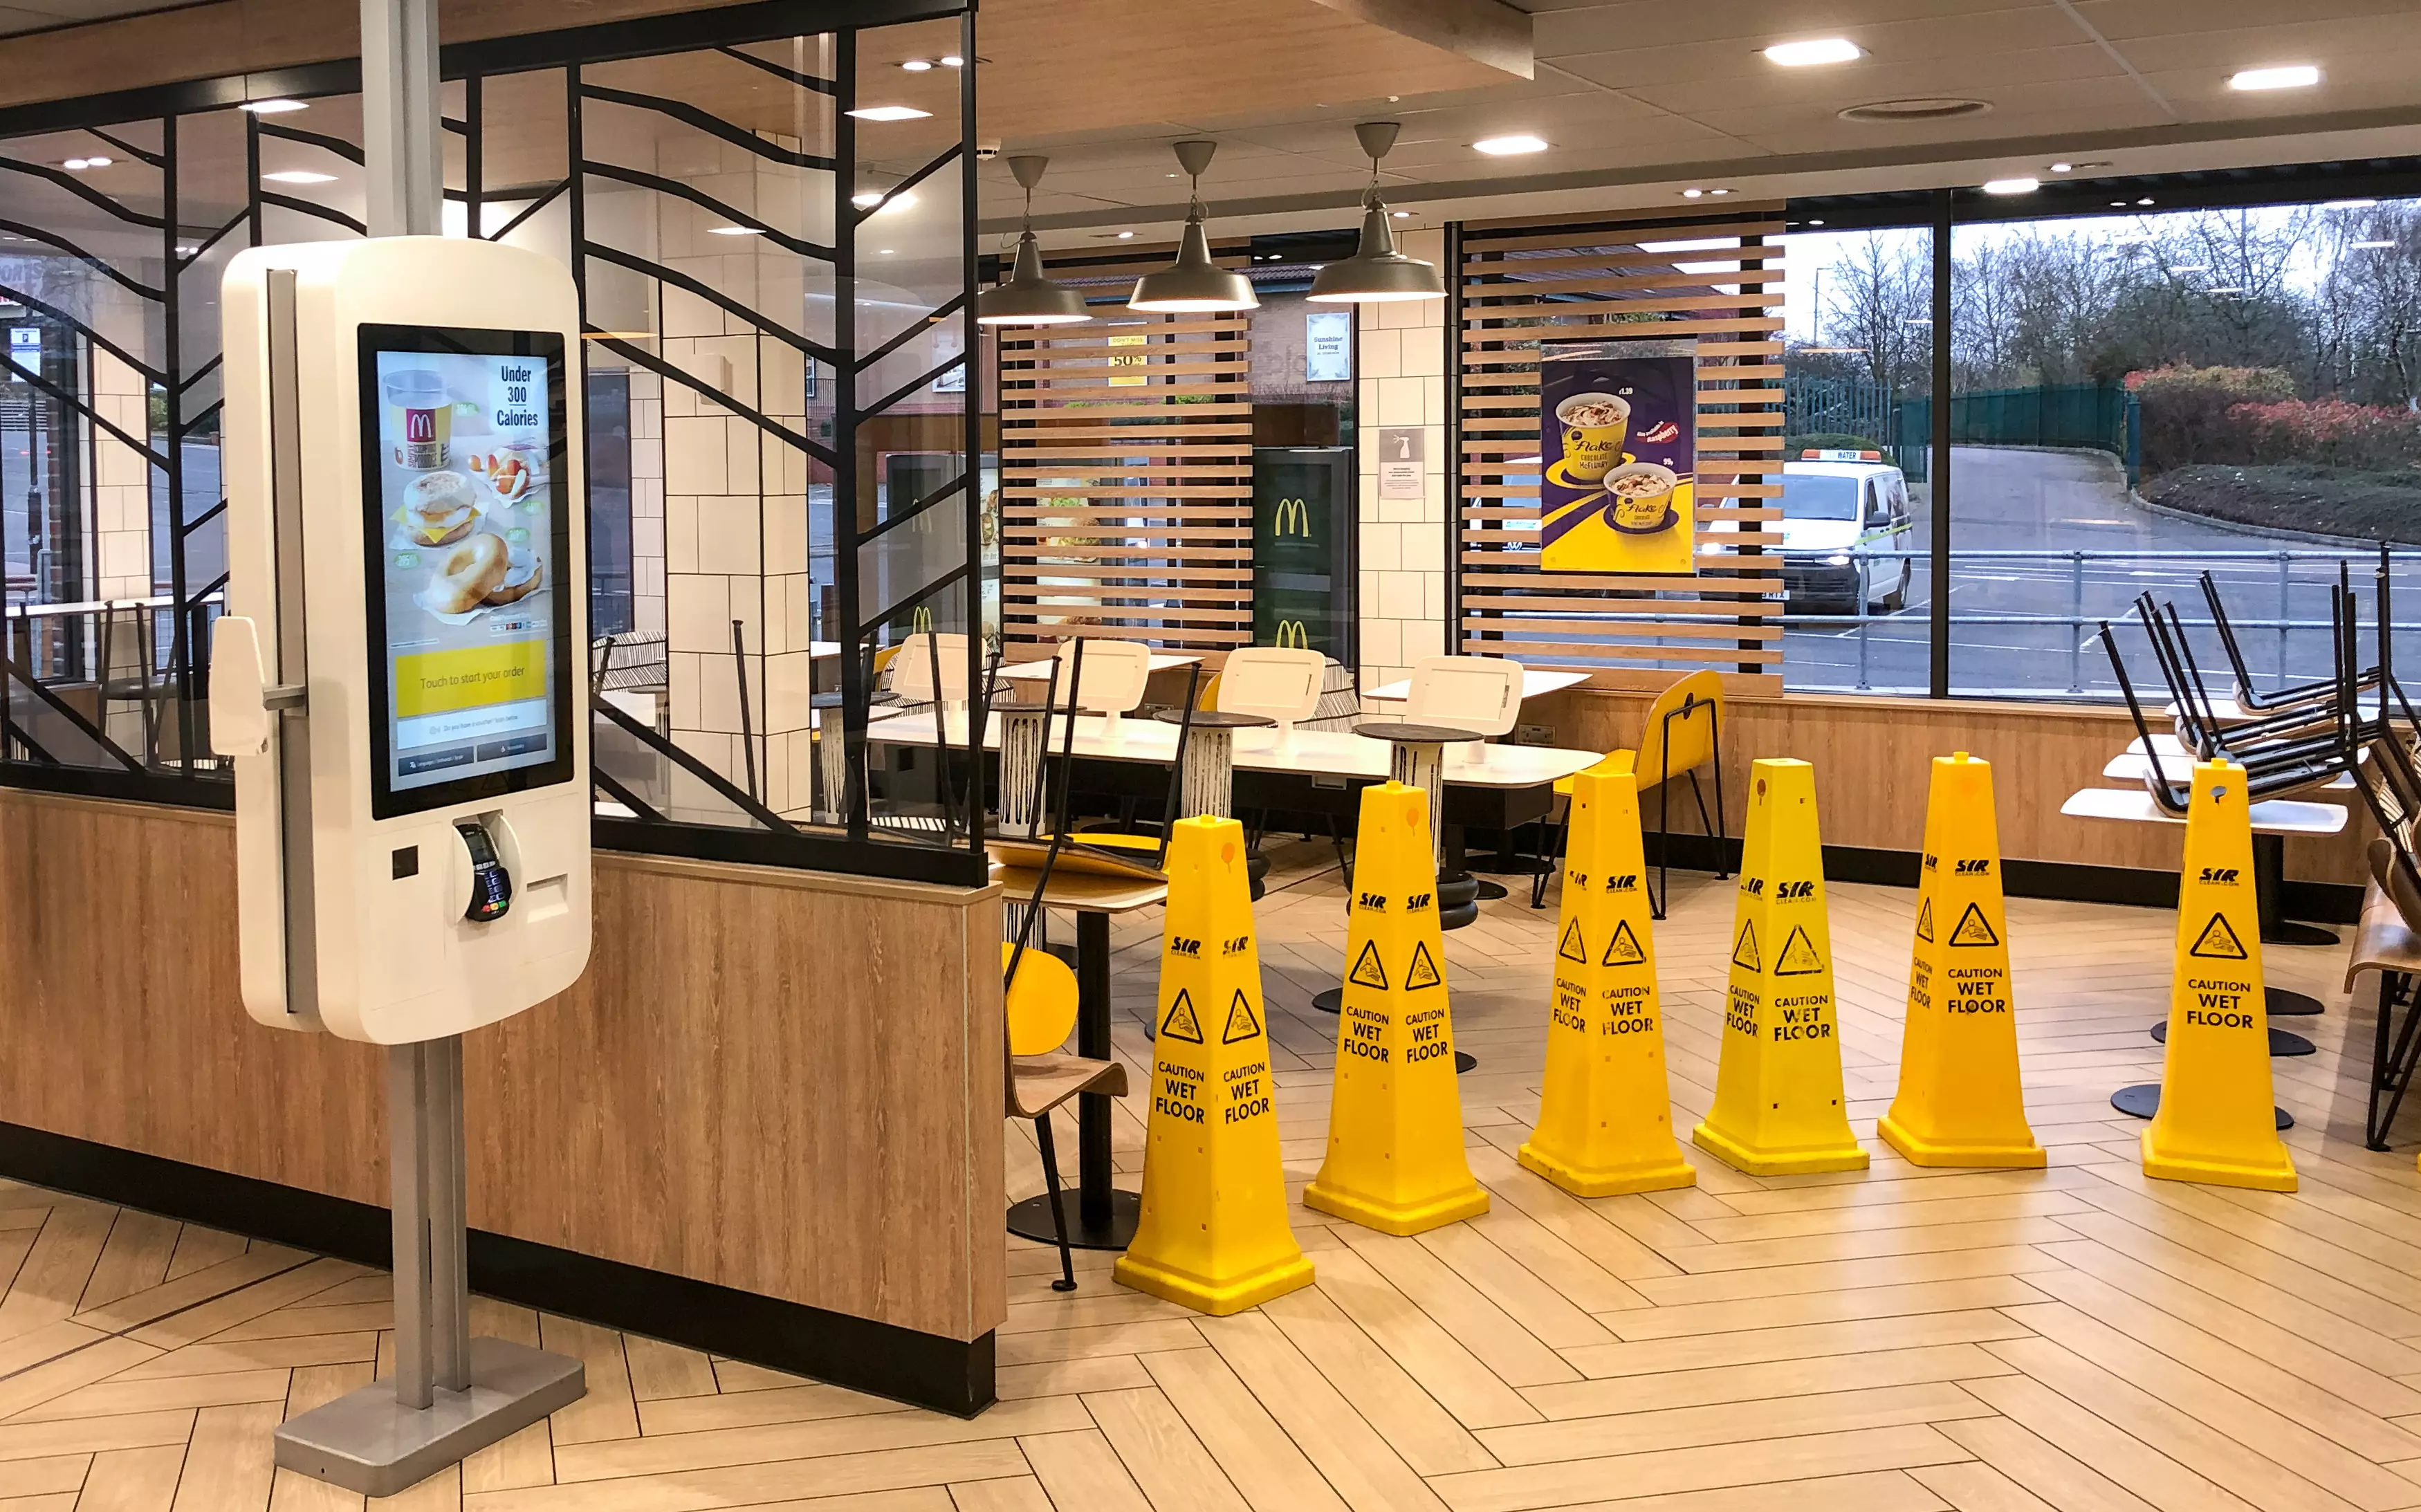 McDonald's closed its seating areas on Wednesday (18 March) to limit the spread of Covid-19.